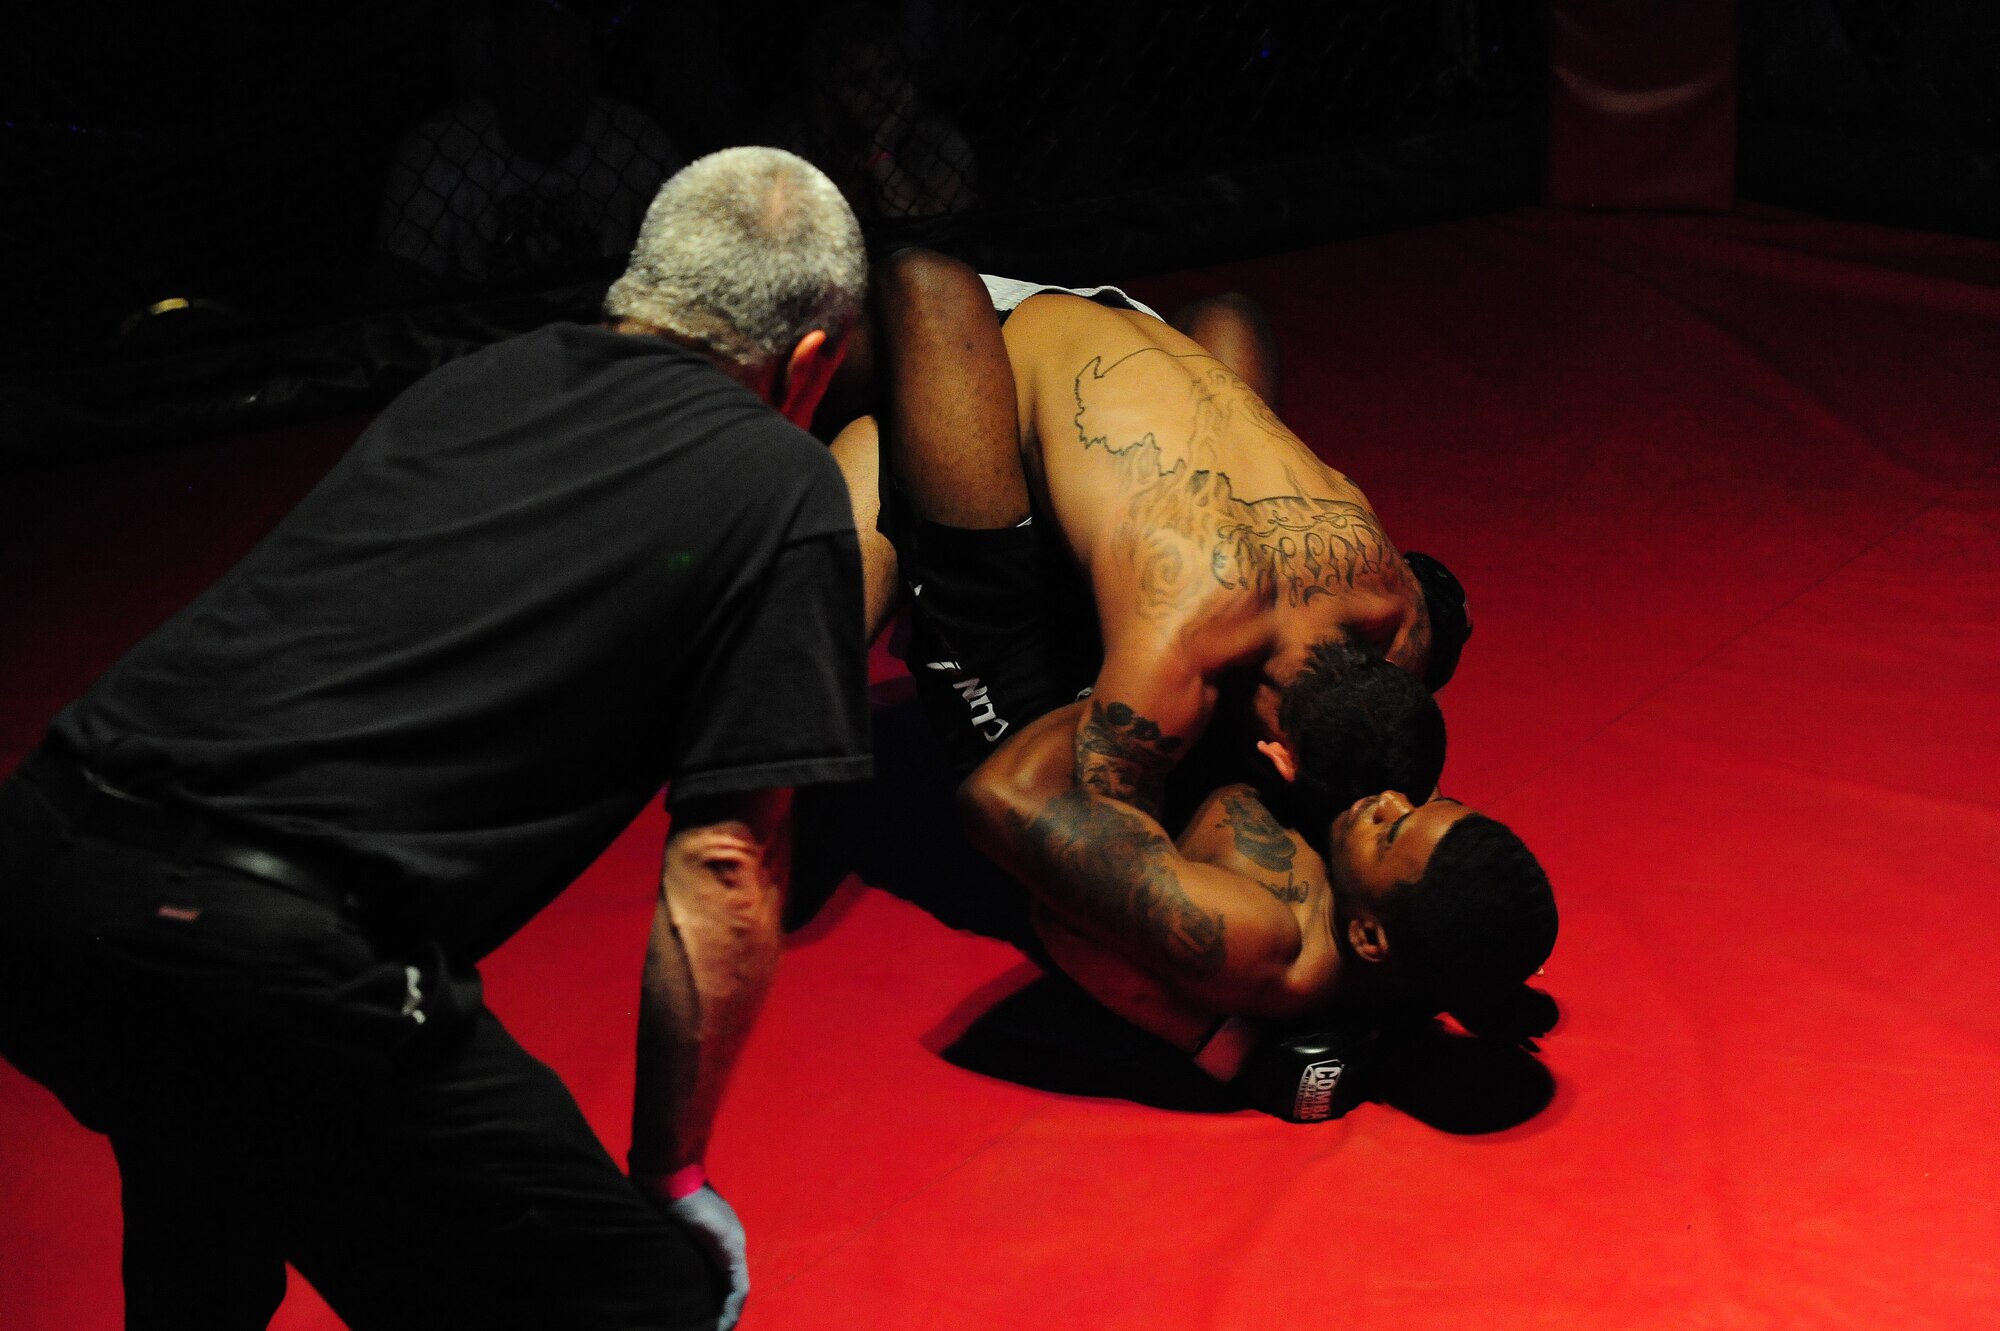 Steven Dickerson, 509th Maintenance Squadron, defends from the bottom as Chalen Chaney fights from the half- mount position during an amateur mixed martial arts match at Bottoms Up in Sedalia, Mo., May 18, 2013. Dickerson has been training on various mixed martial arts techniques, including jiu-jitsu, judo, hand-to-hand combat and grappling. (U.S. Air Force photo by Staff Sgt. Nick Wilson/Released)